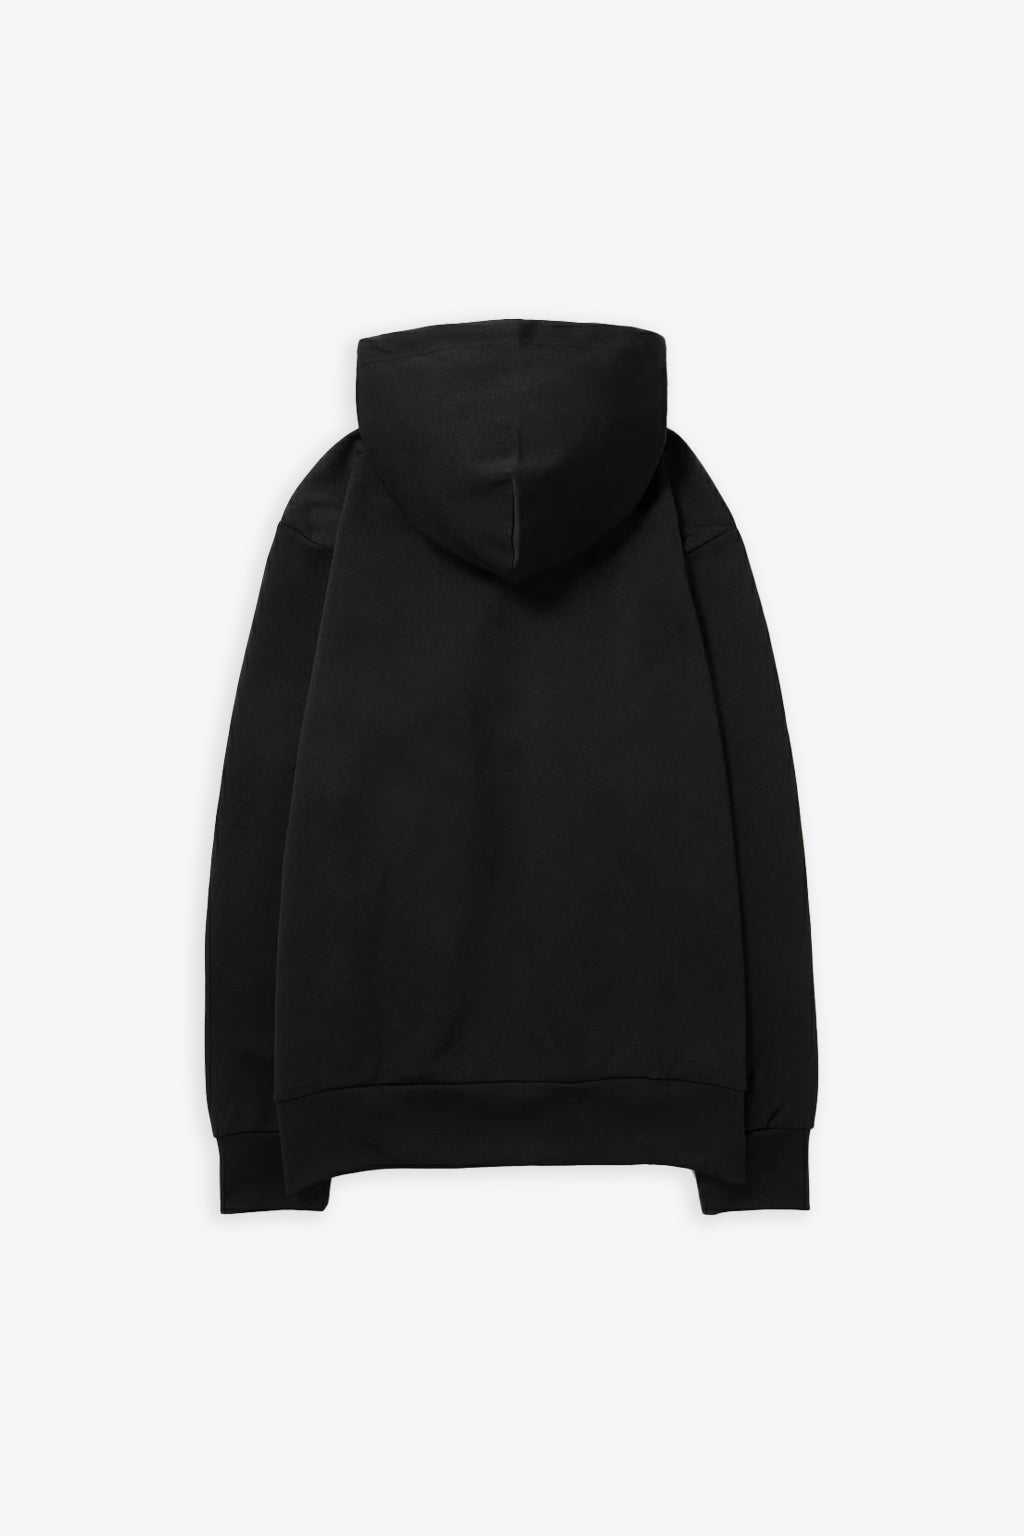 alt-image__Black-hoodie-with-heart-patch-at-chest